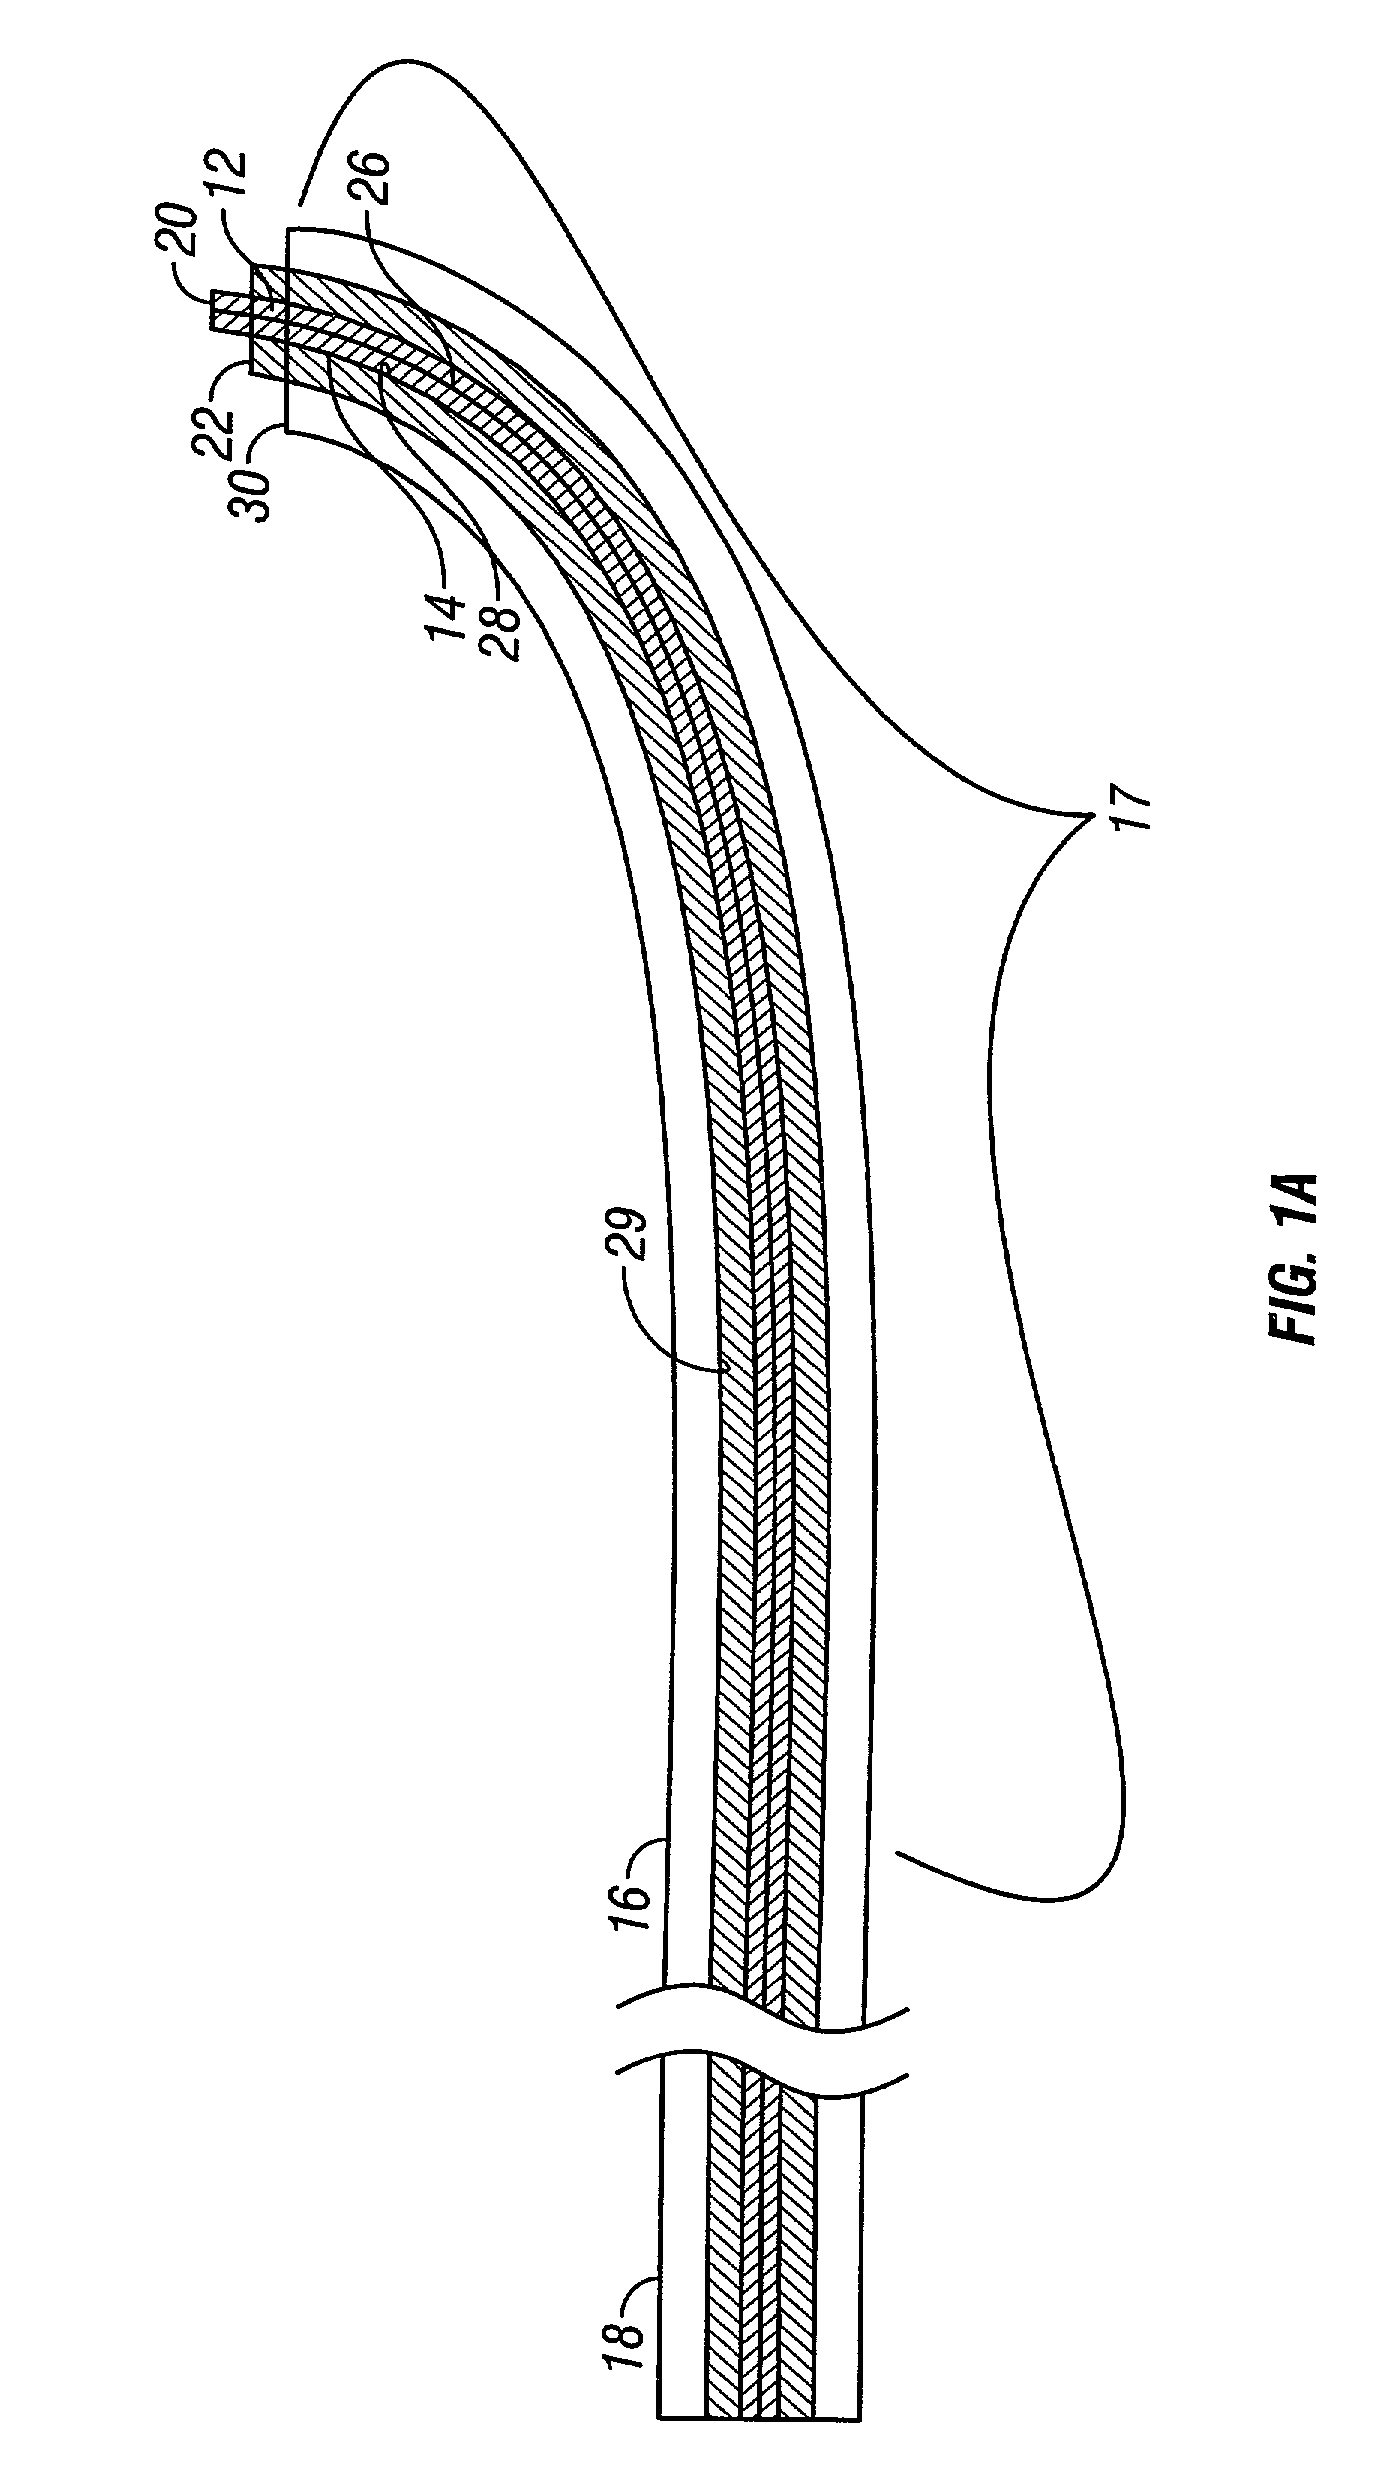 Telescopic introducer with a compound curvature for inducing alignment and method of using the same